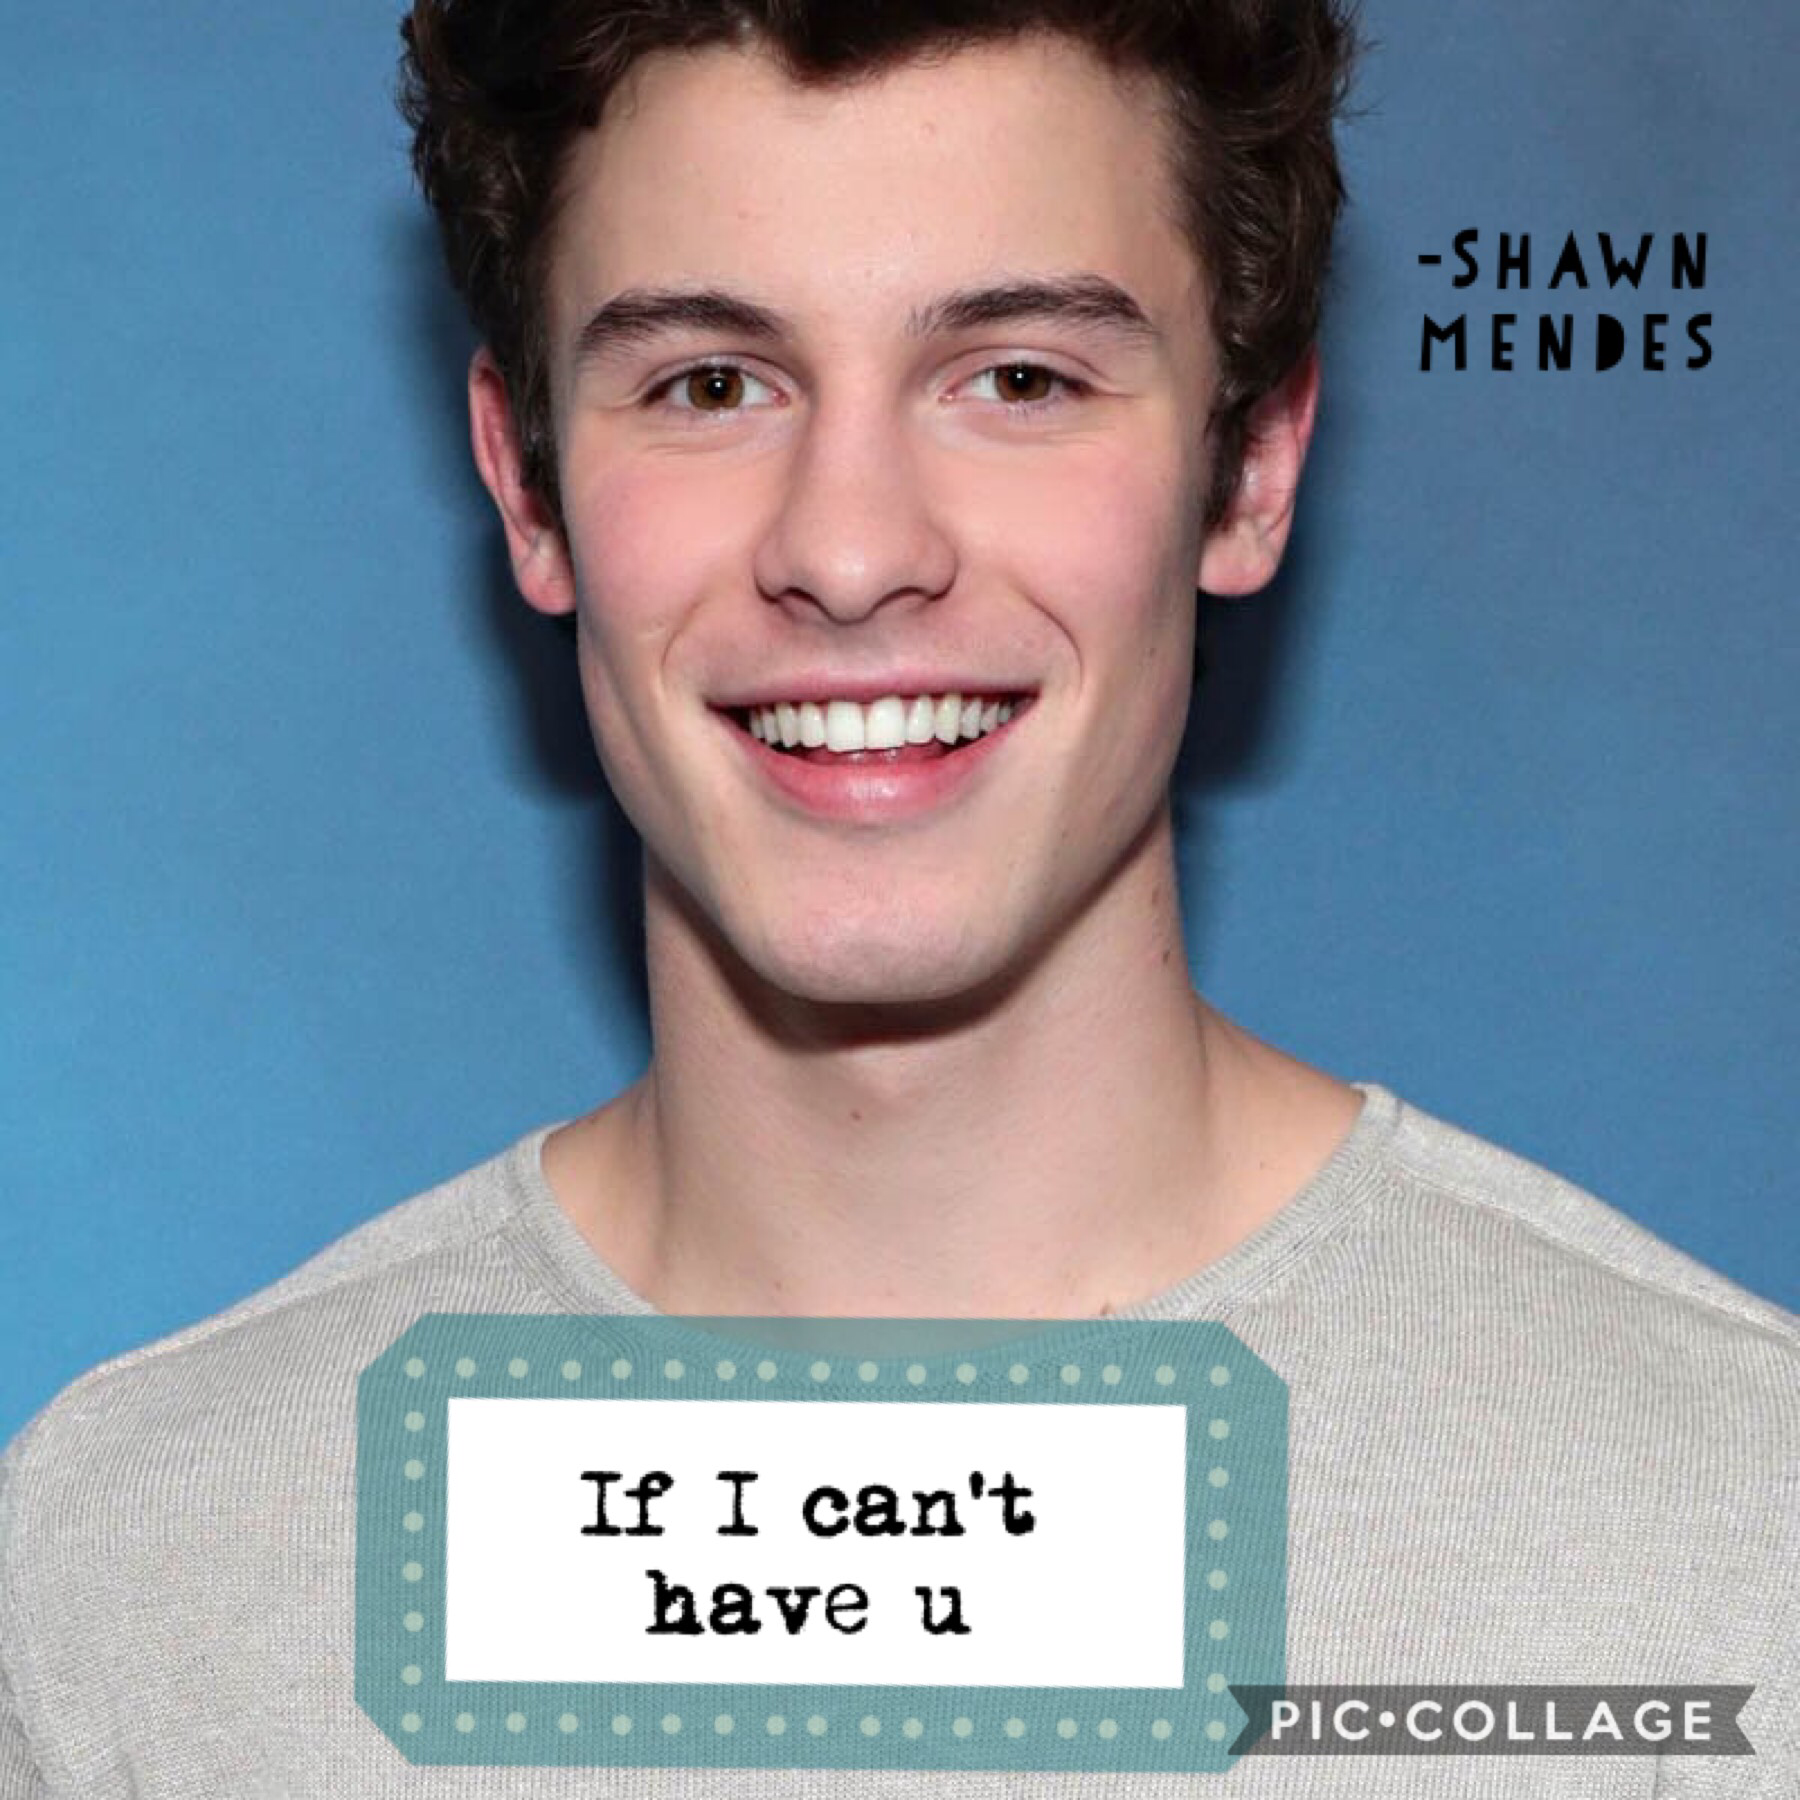 This is to round 1 Shawn mendes if I can’t have u